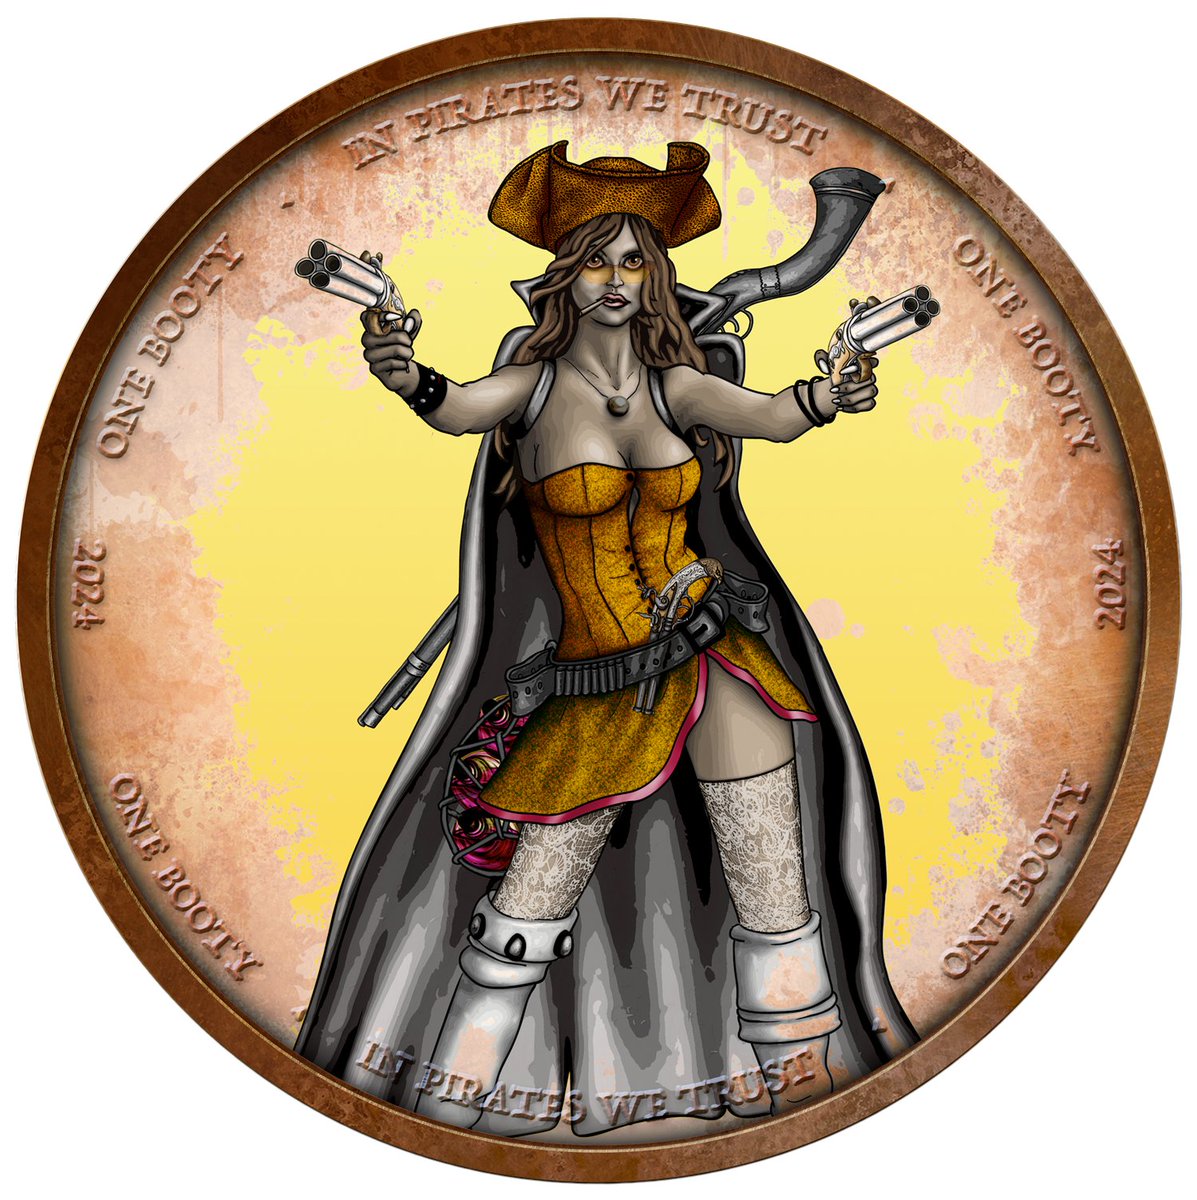 Ahoy sailors! ⚓️Here be Pearl #4, the wicked wench of the sea. She be commin aboard with Lucy and Astra setting sail on the turbulent Ordinals seas.  Keep yer eyes on Pirate Worlds! 🏴‍☠️ #pirateworlds #Ordinals #OrdinalsNFT #digitalart #art #NFTcollection #NFTdrop #cryptoart